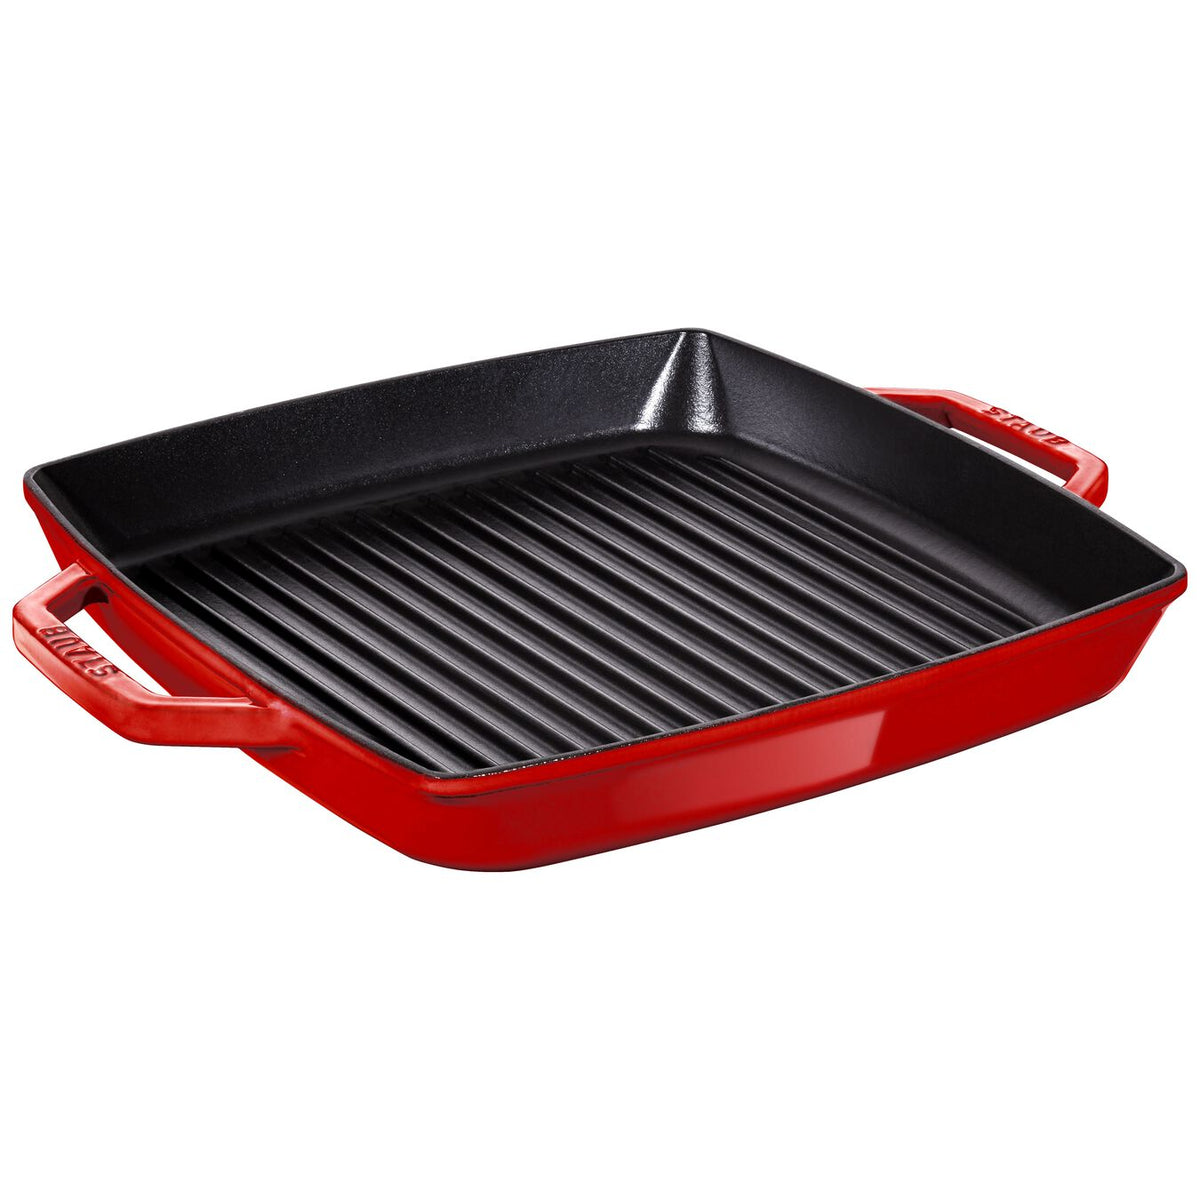 STAUB - GRILL PANS 33 CM / 13 INCH CAST IRON SQUARE GRILL PAN, CHERRY —  Kitchen Equipped